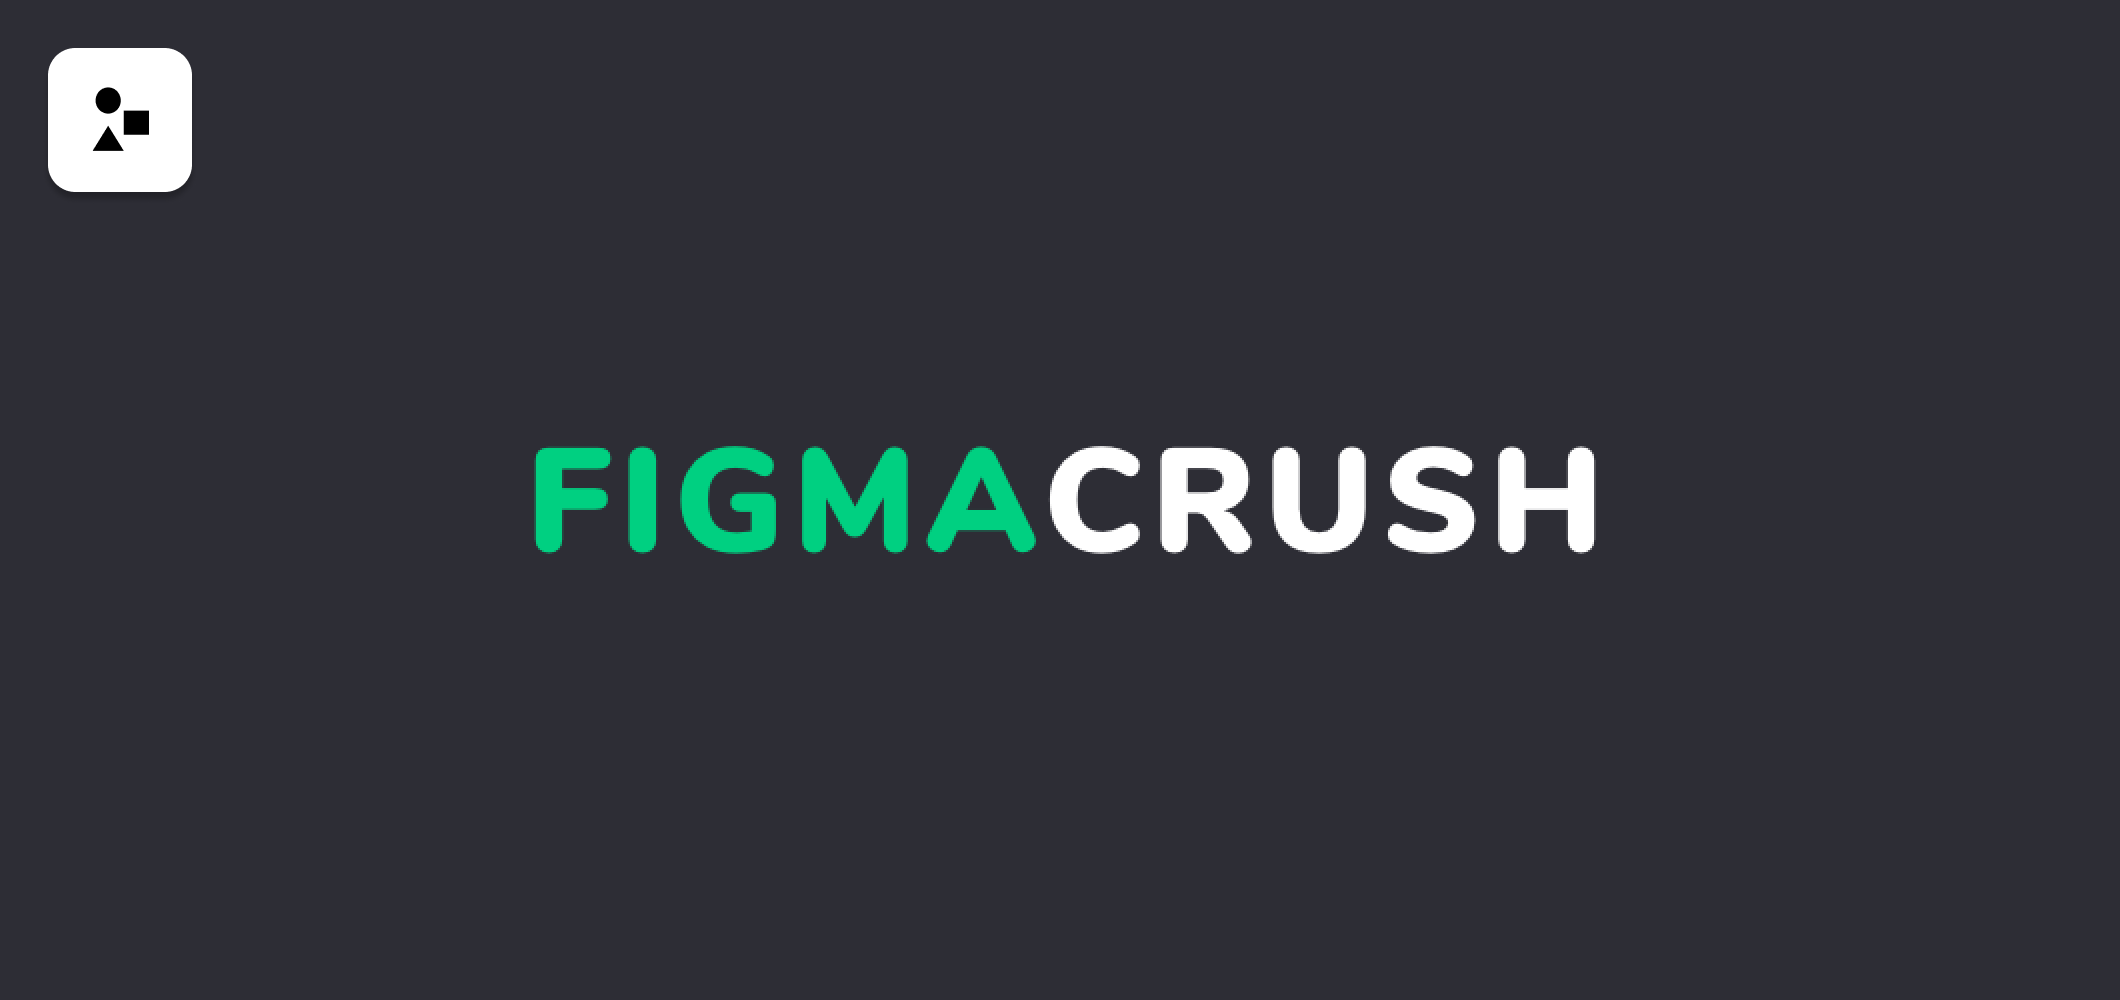 figma resources